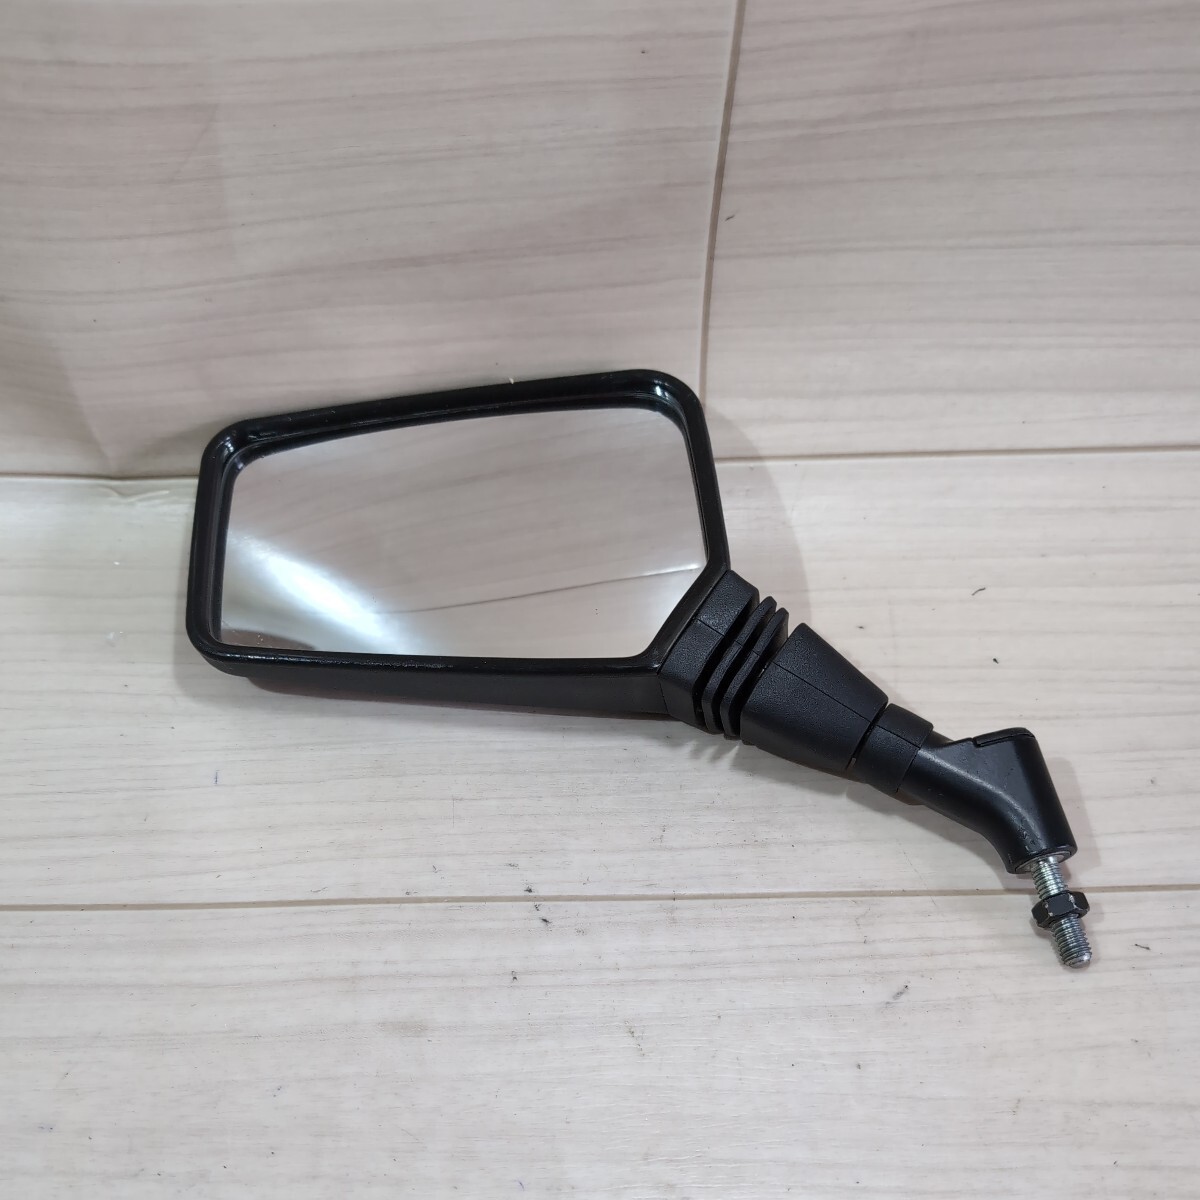 c898 bike mirror Napoleon right side 8 millimeter regular screw secondhand goods postage included that time thing?